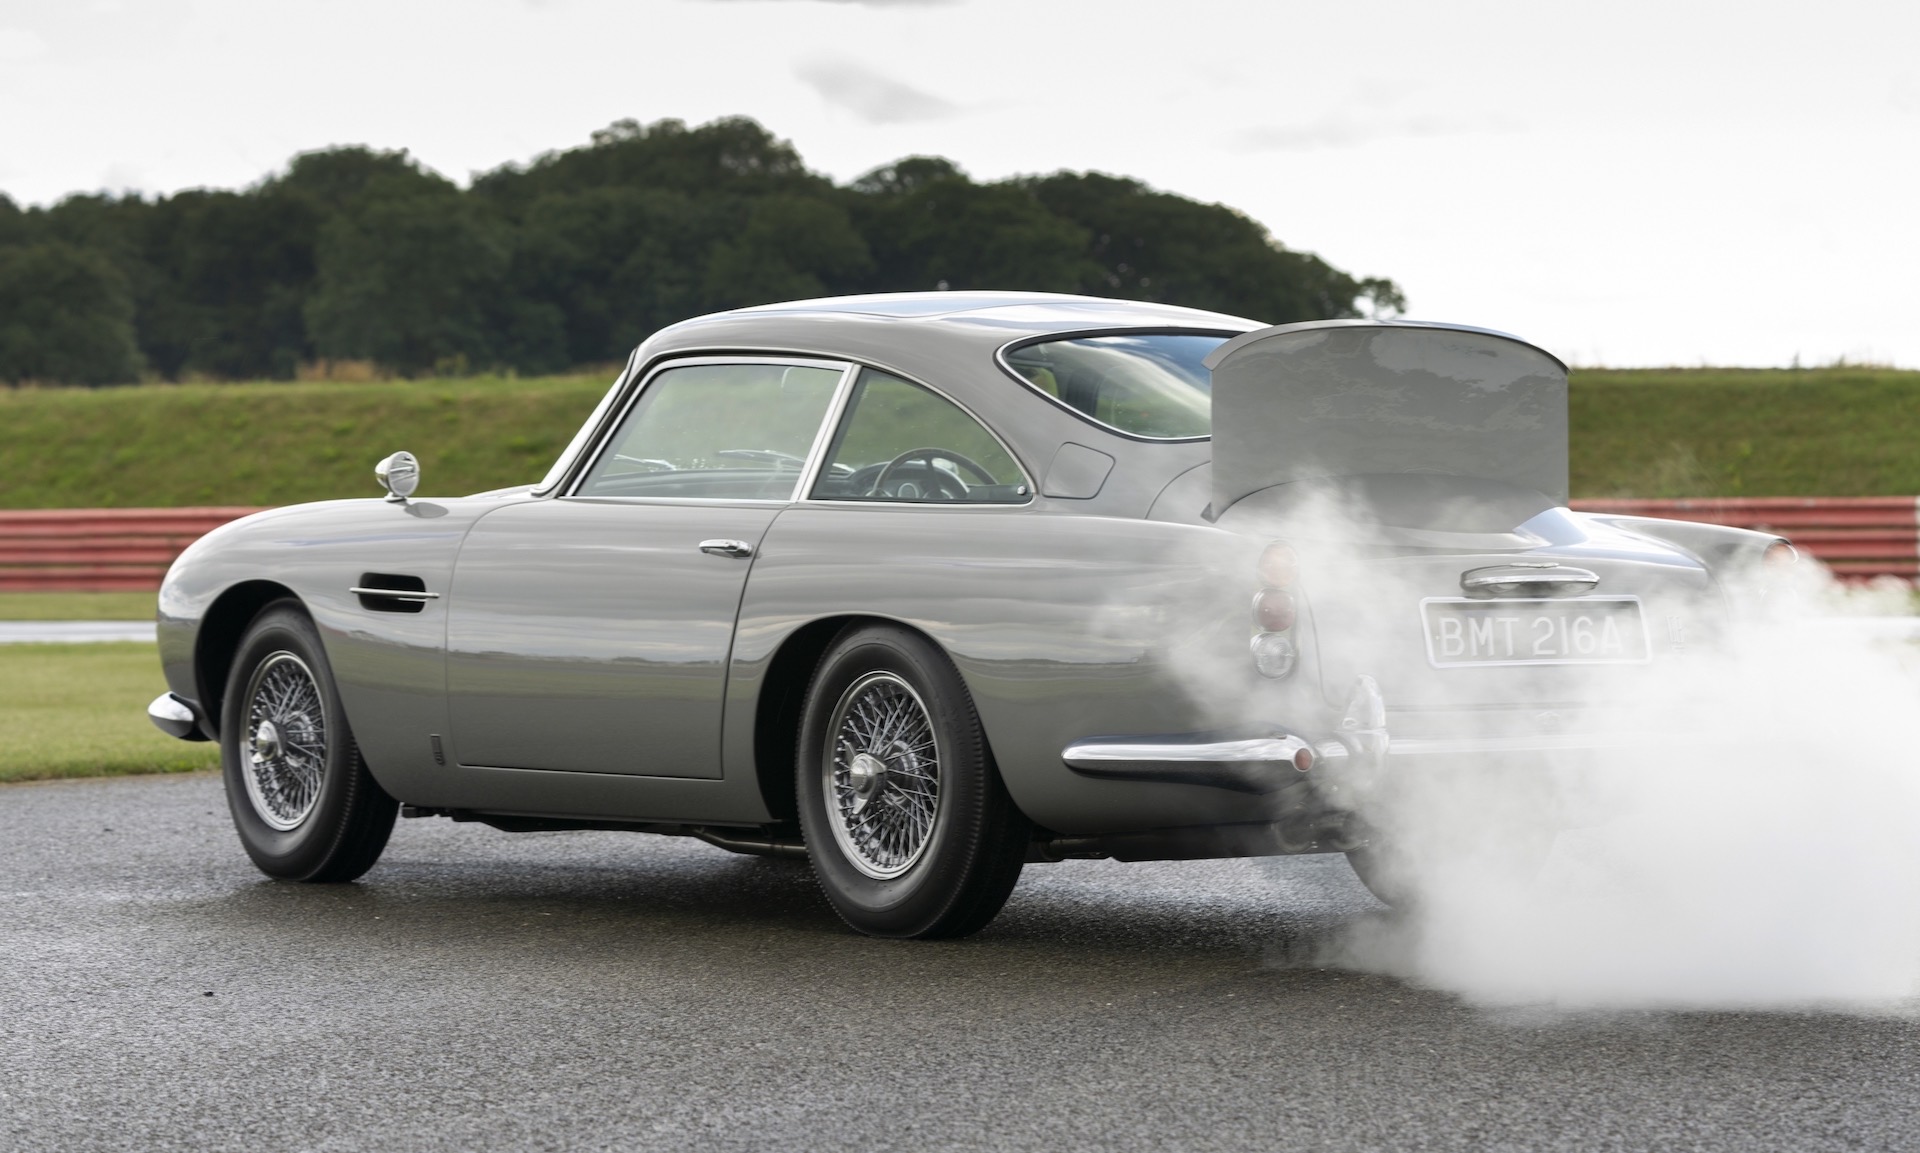 Video: Aston Martin shows off first DB5 Goldfinger Continuation